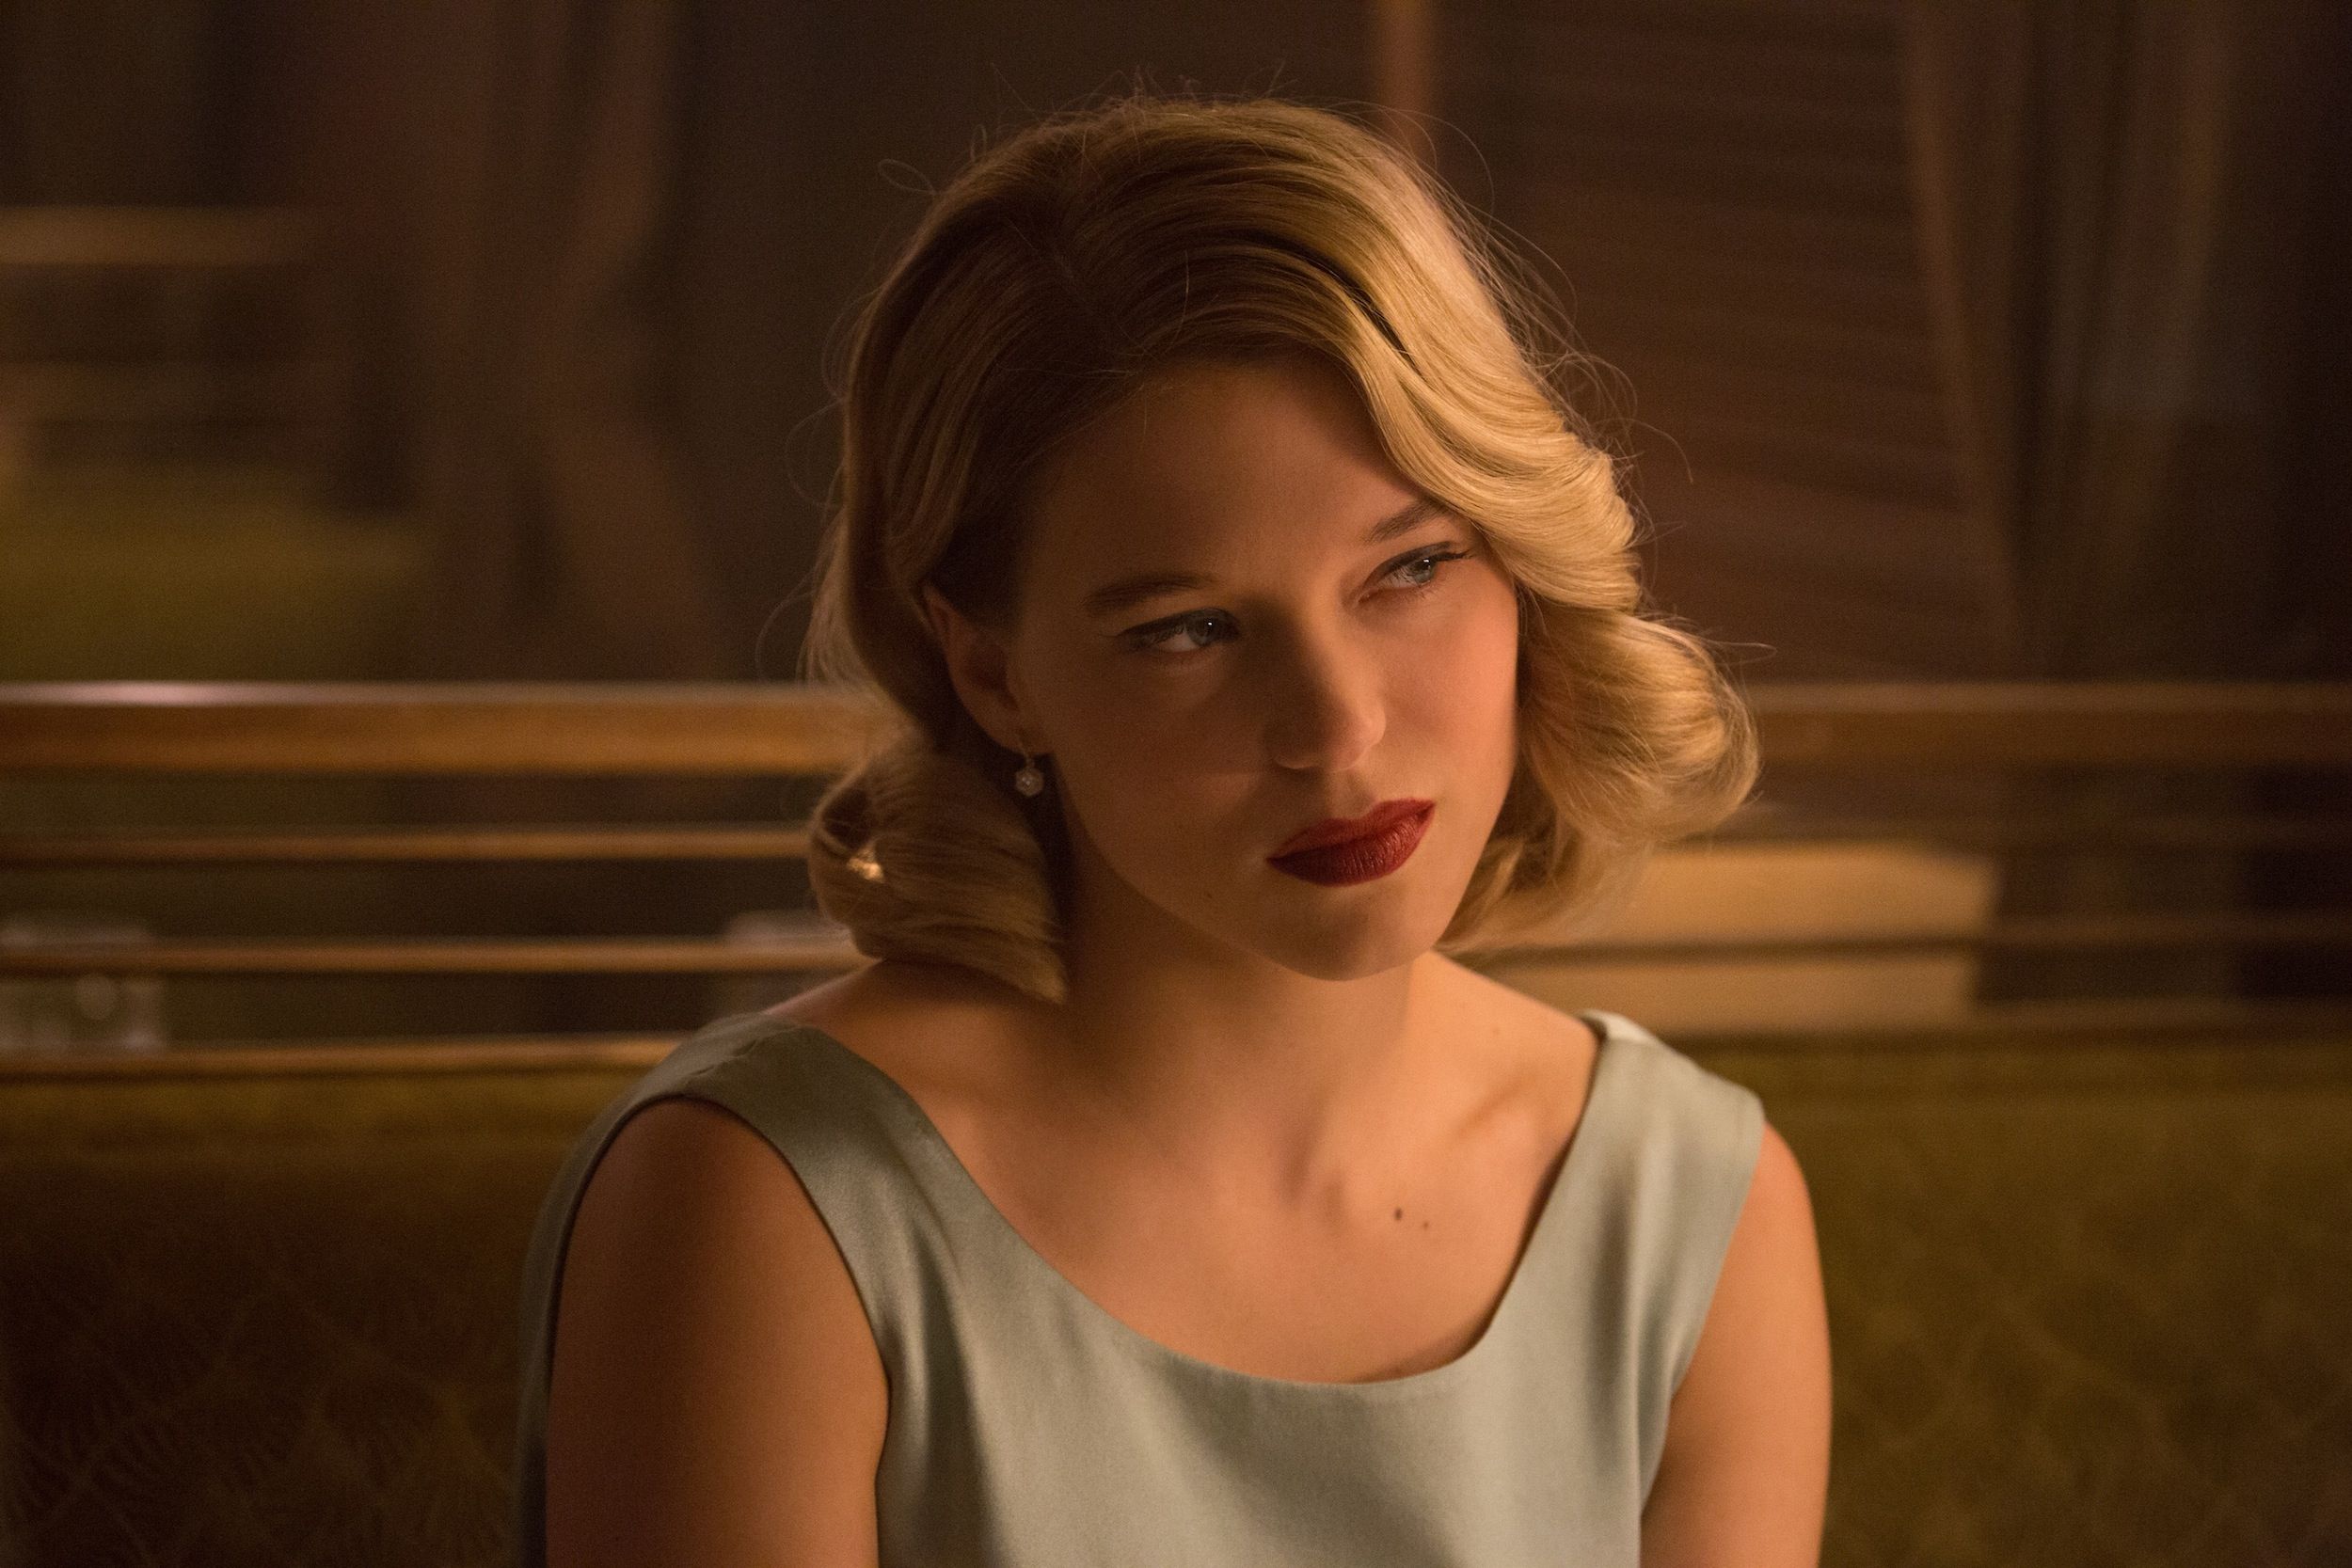 Léa Seydoux Wanted to Work with Channing Tatum, but She'll Take